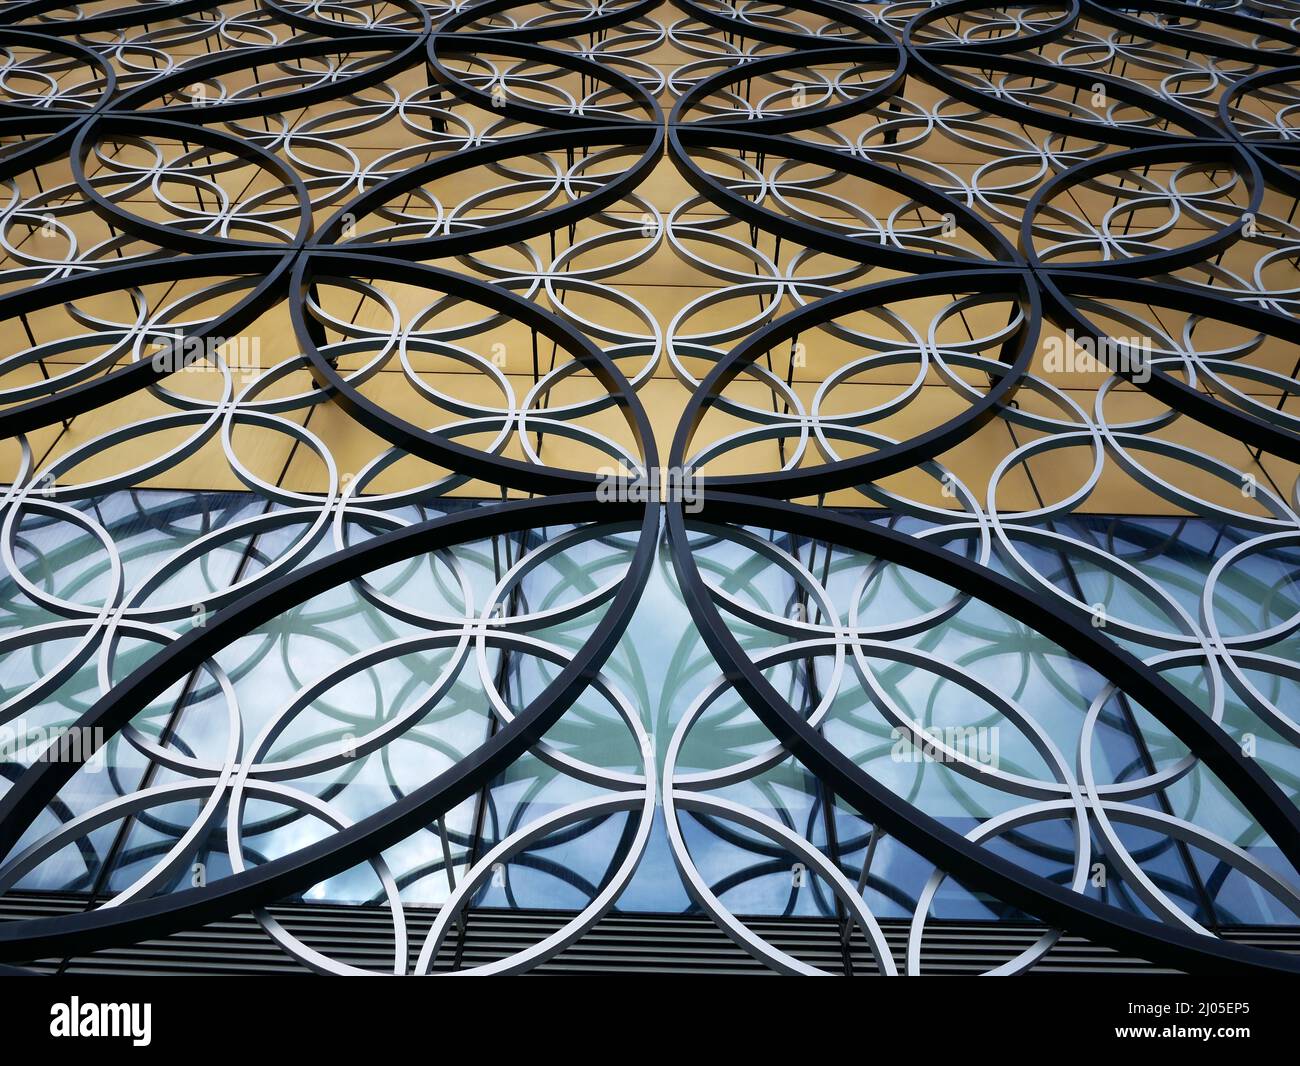 Birmingham Library detail of the decorative external cladding designed by Mecanoo architects studio as a nod to the city's jewellery quarter. Stock Photo